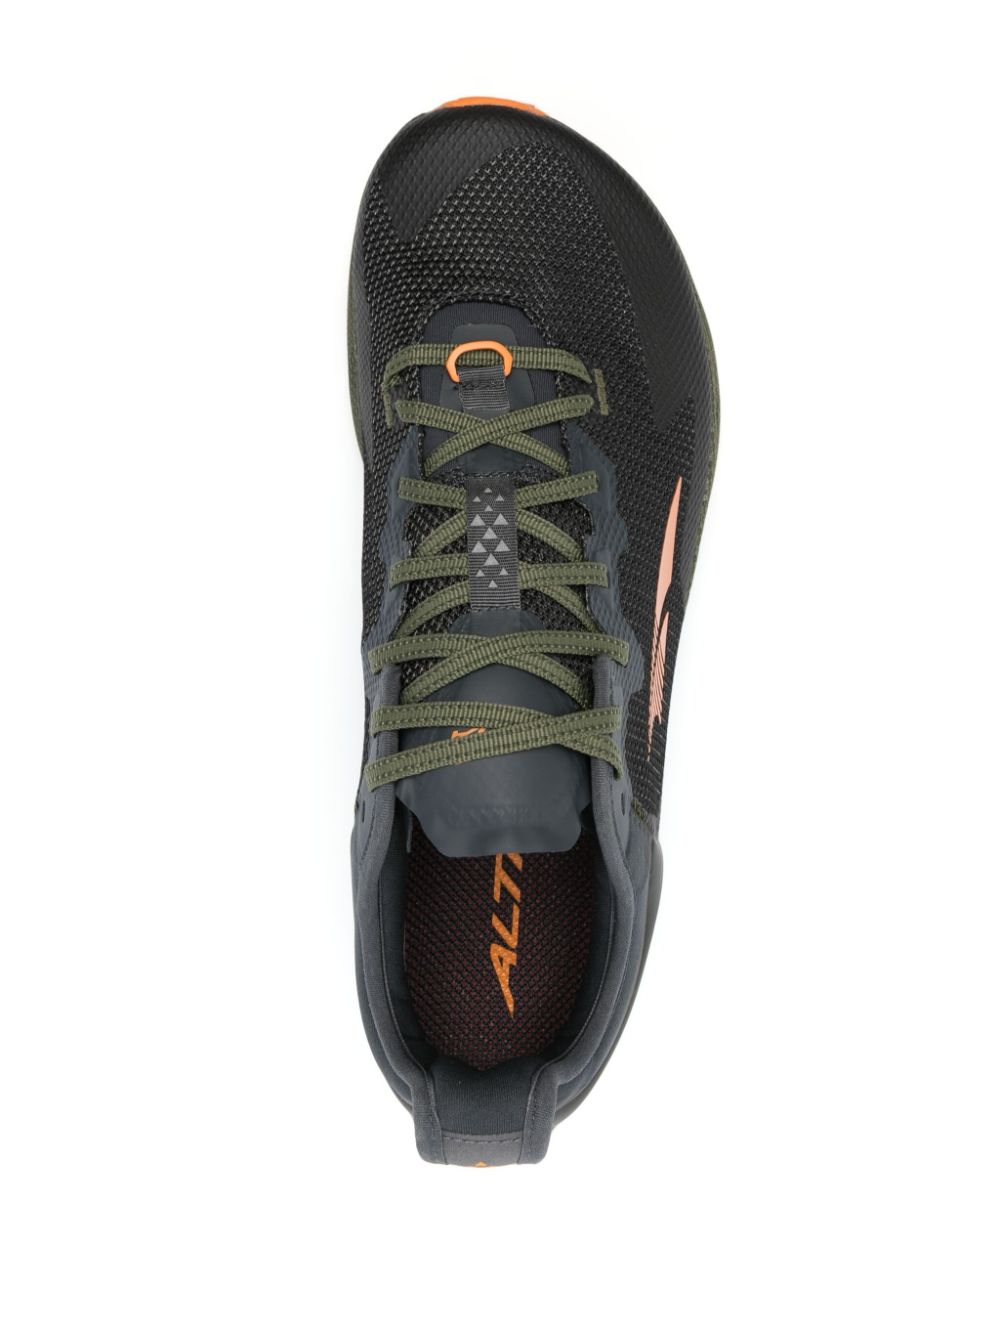 Timp 4 trail sneakers